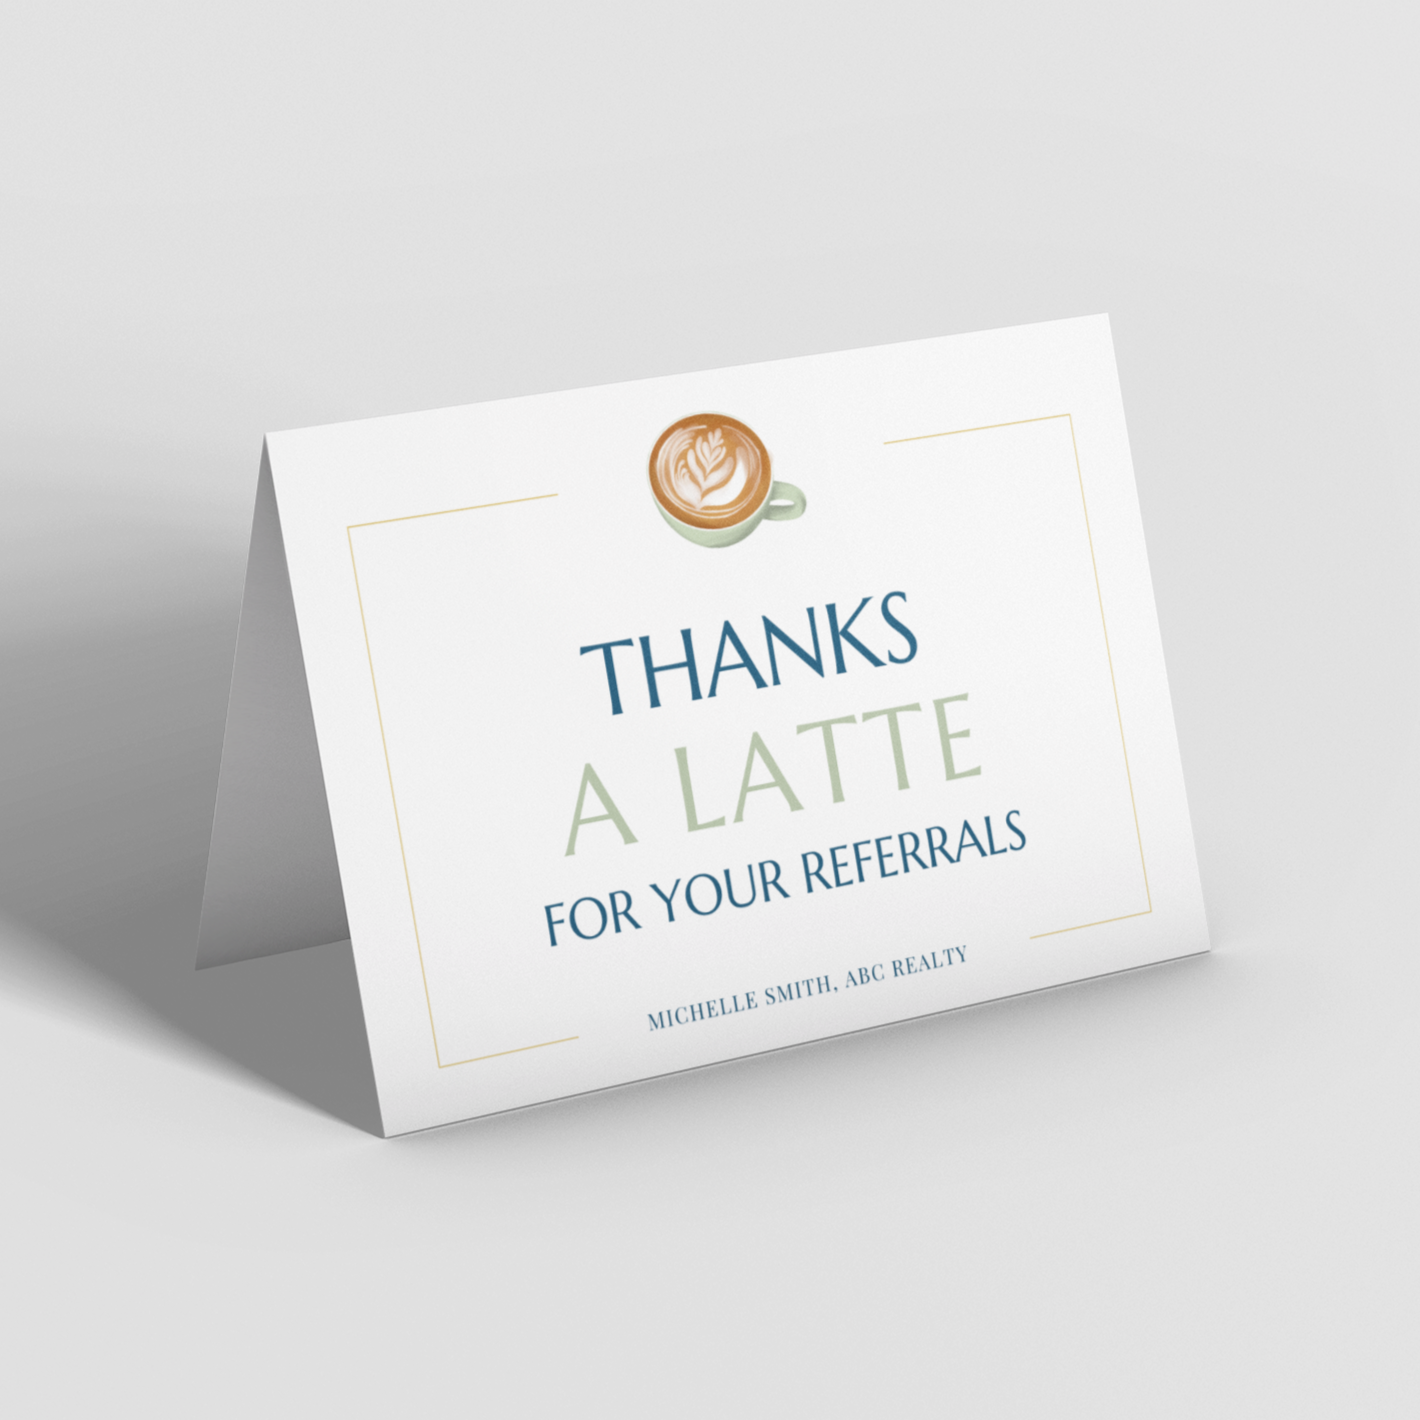 Thanks a Latte For Your Referrals